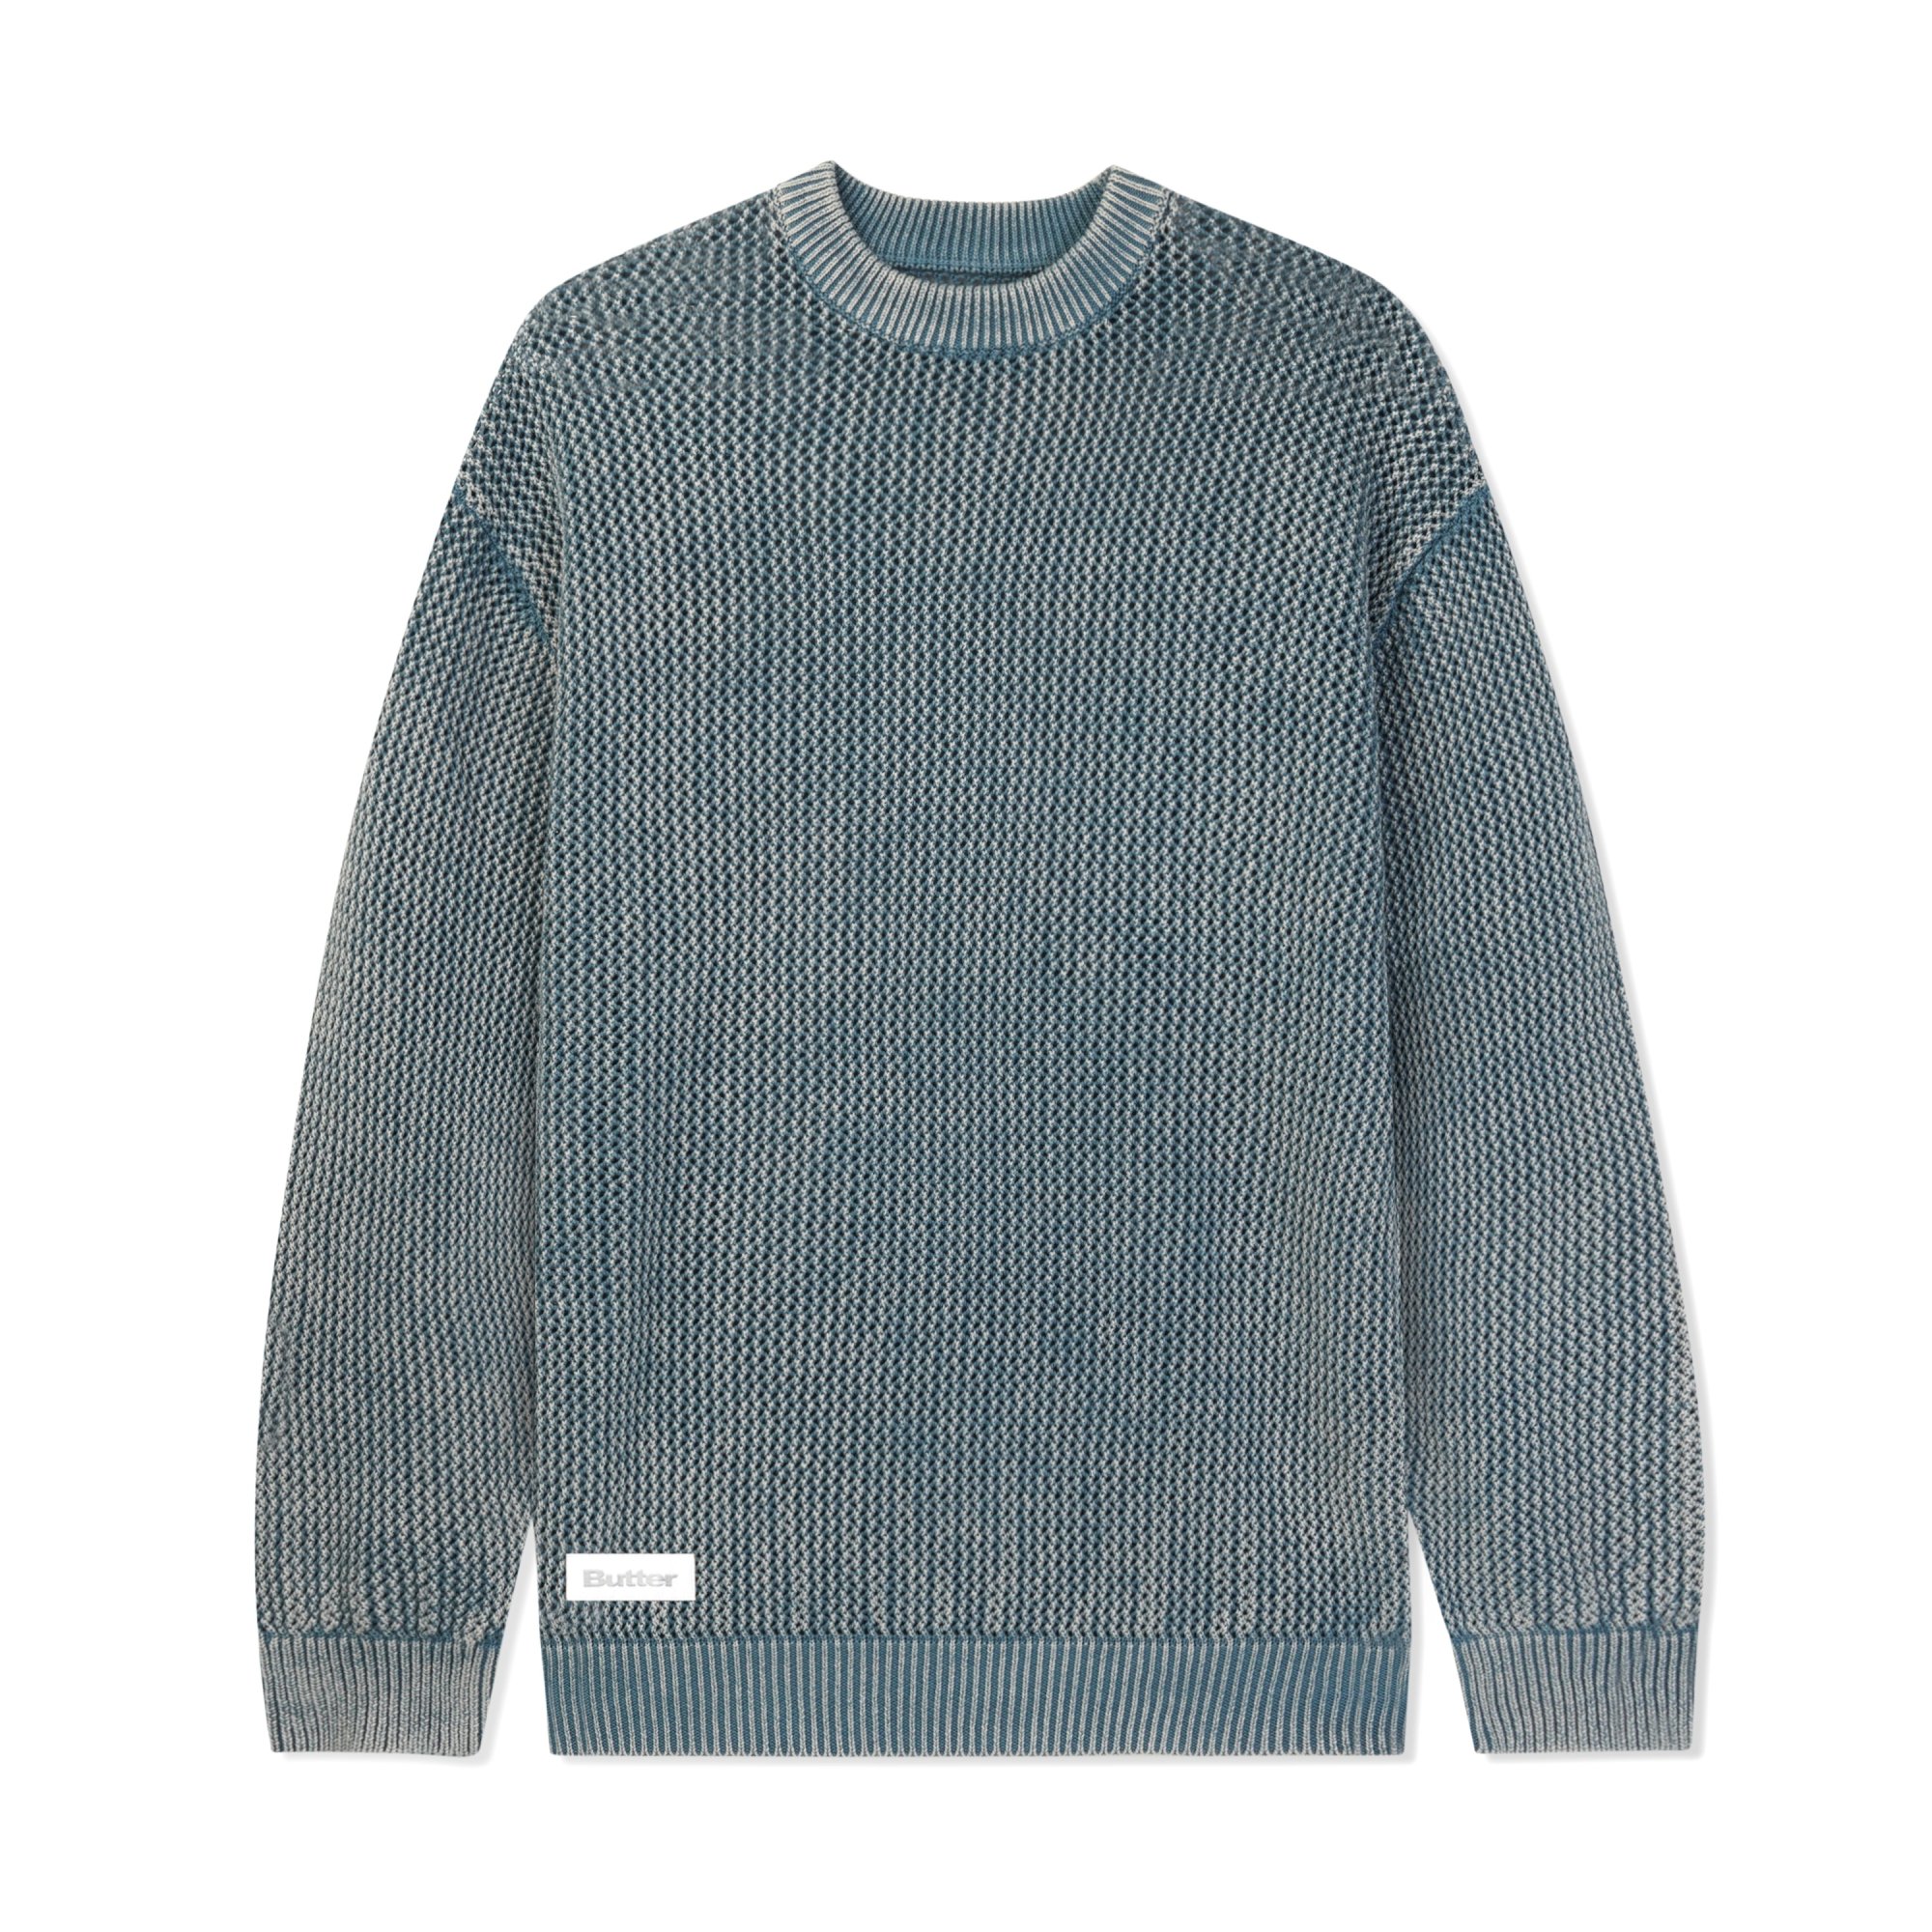 BUTTER GOODS<br>Washed Knitted Sweater<br>